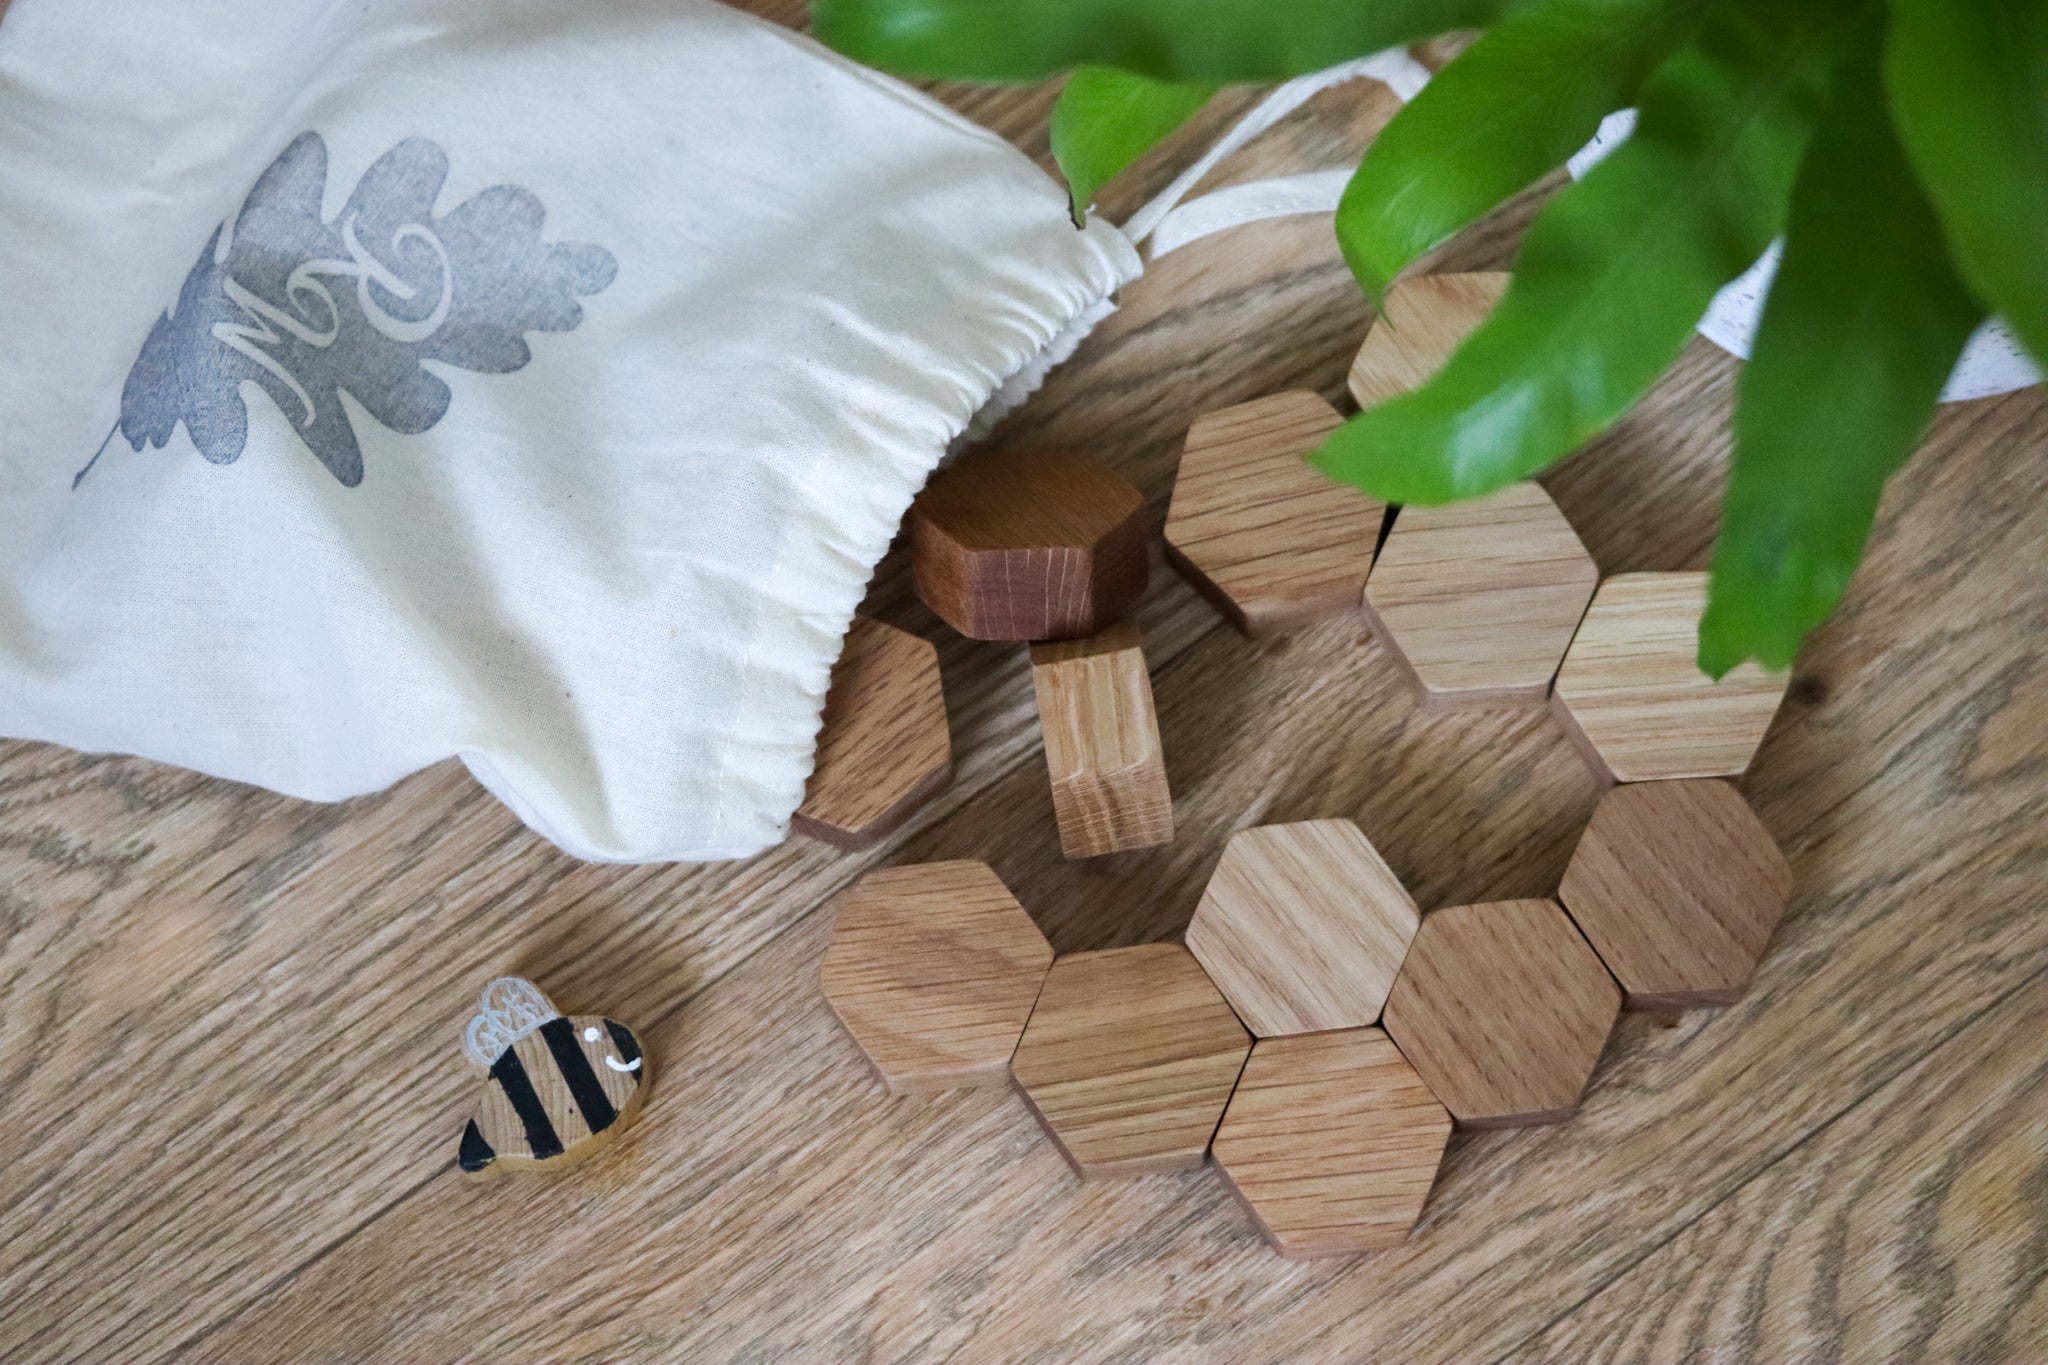 Wooden oak small hexagon blocks tipped out of a cotton bag onto a wooden floor with a plant in the background. Shot looking down with a wooden bee in the corner